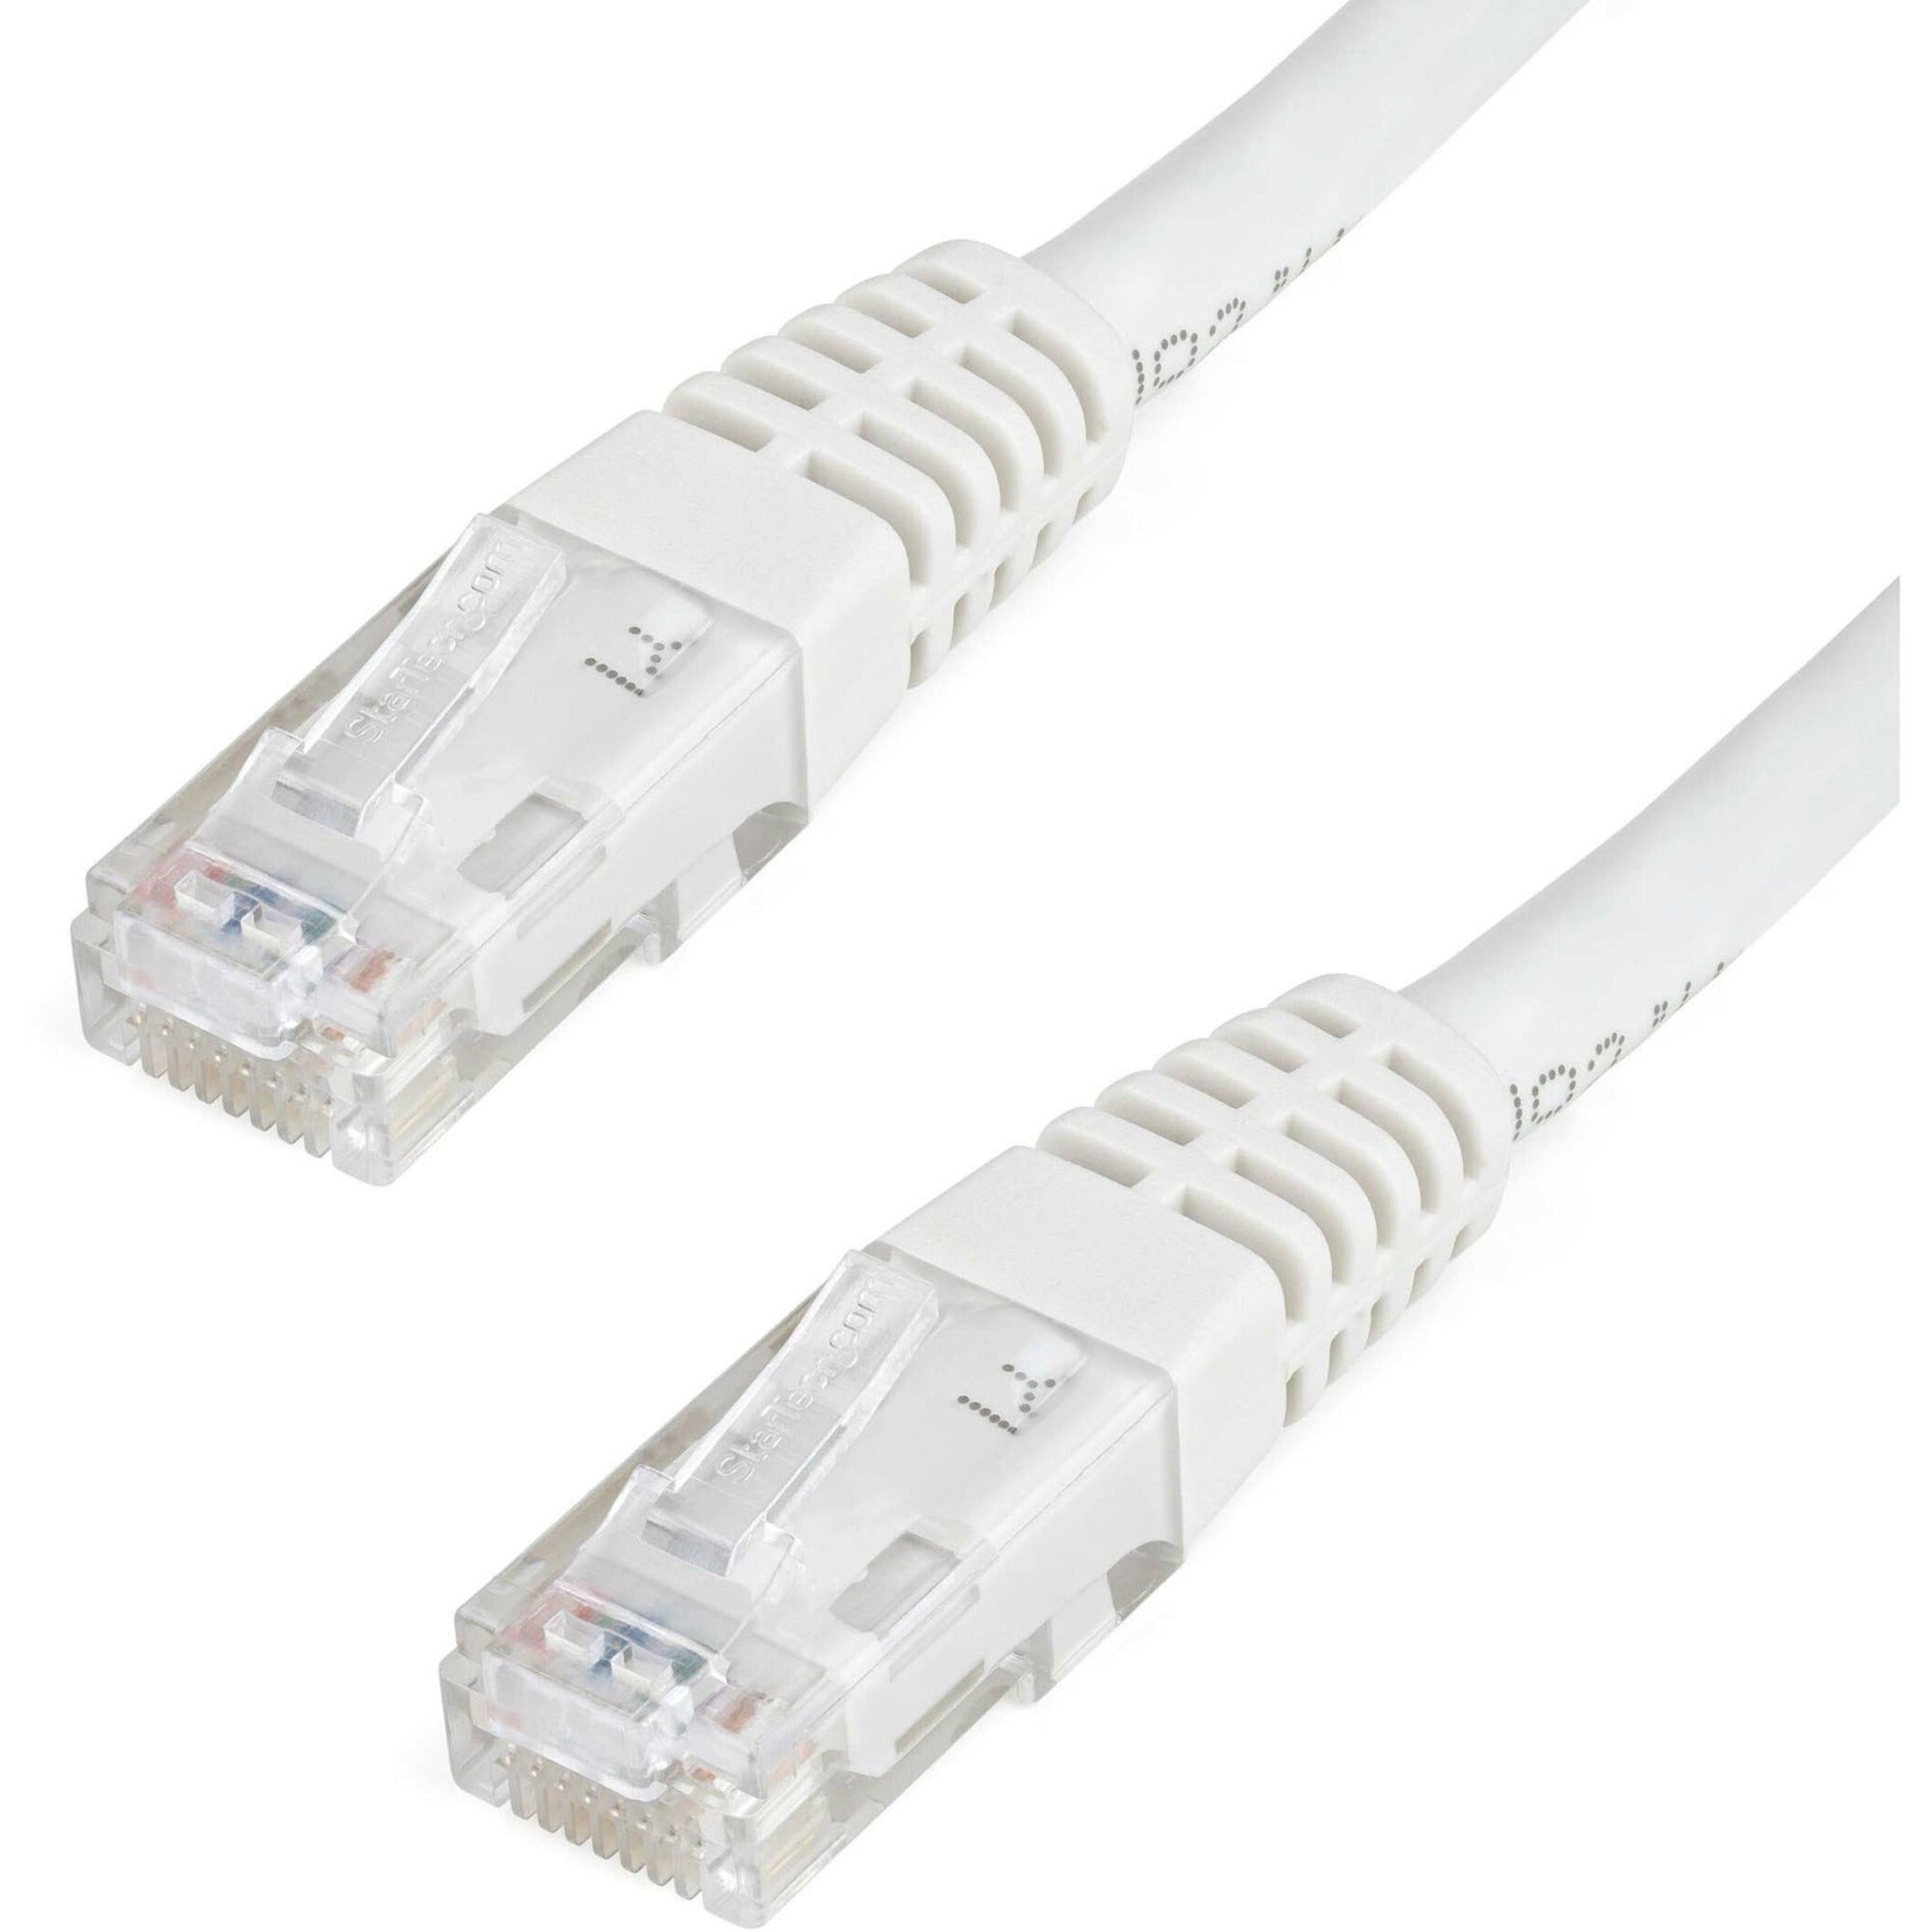 StarTech.com C6PATCH1WH 1ft White Cat6 UTP Patch Cable ETL Verified, 10 Gbit/s Data Transfer Rate, Strain Relief